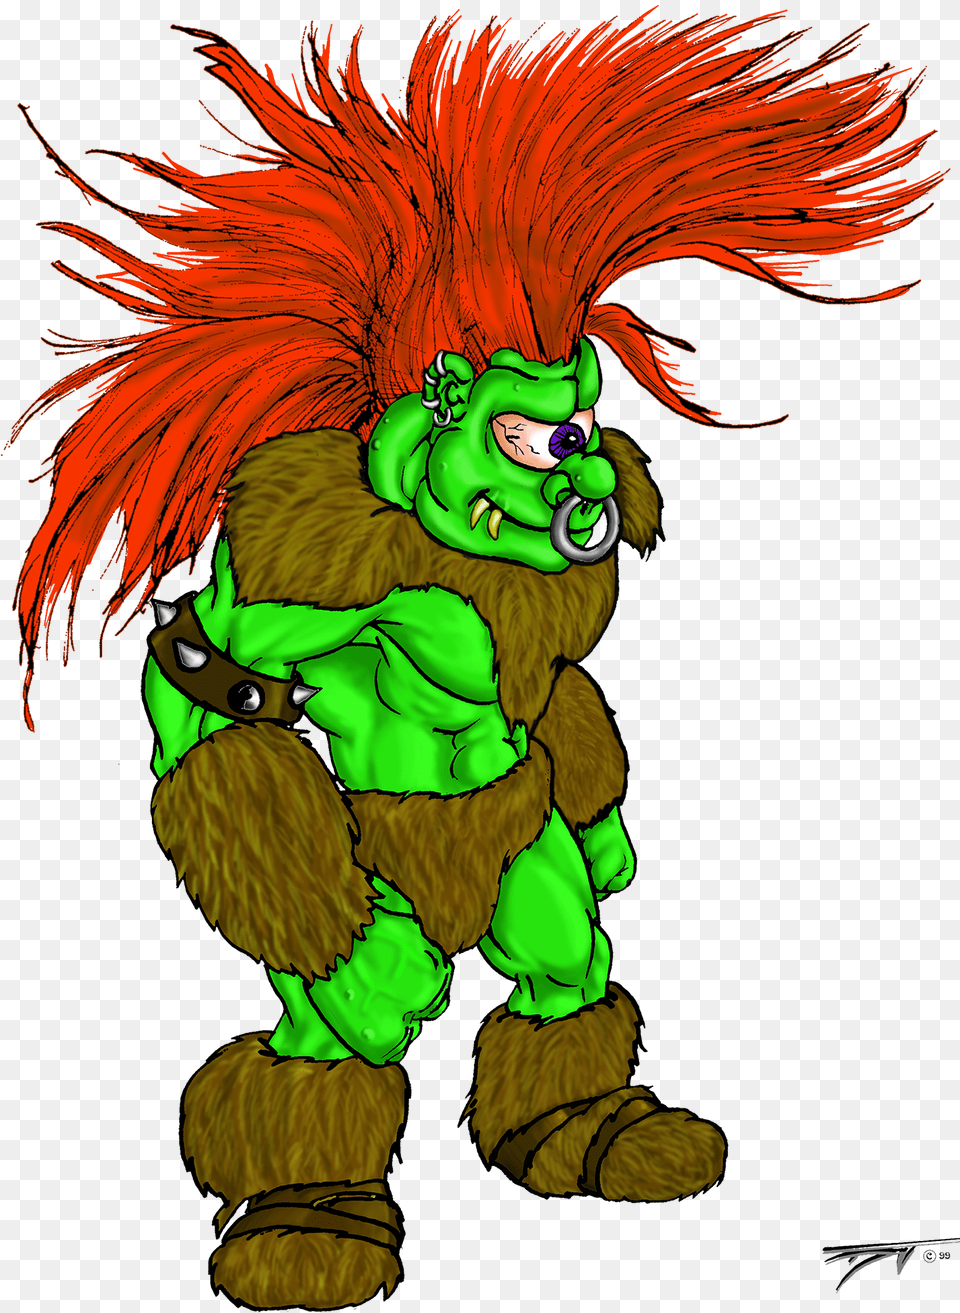 Download Crazy Hair Troll Cartoon Character With Crazy Hair, Book, Comics, Publication, Baby Free Png